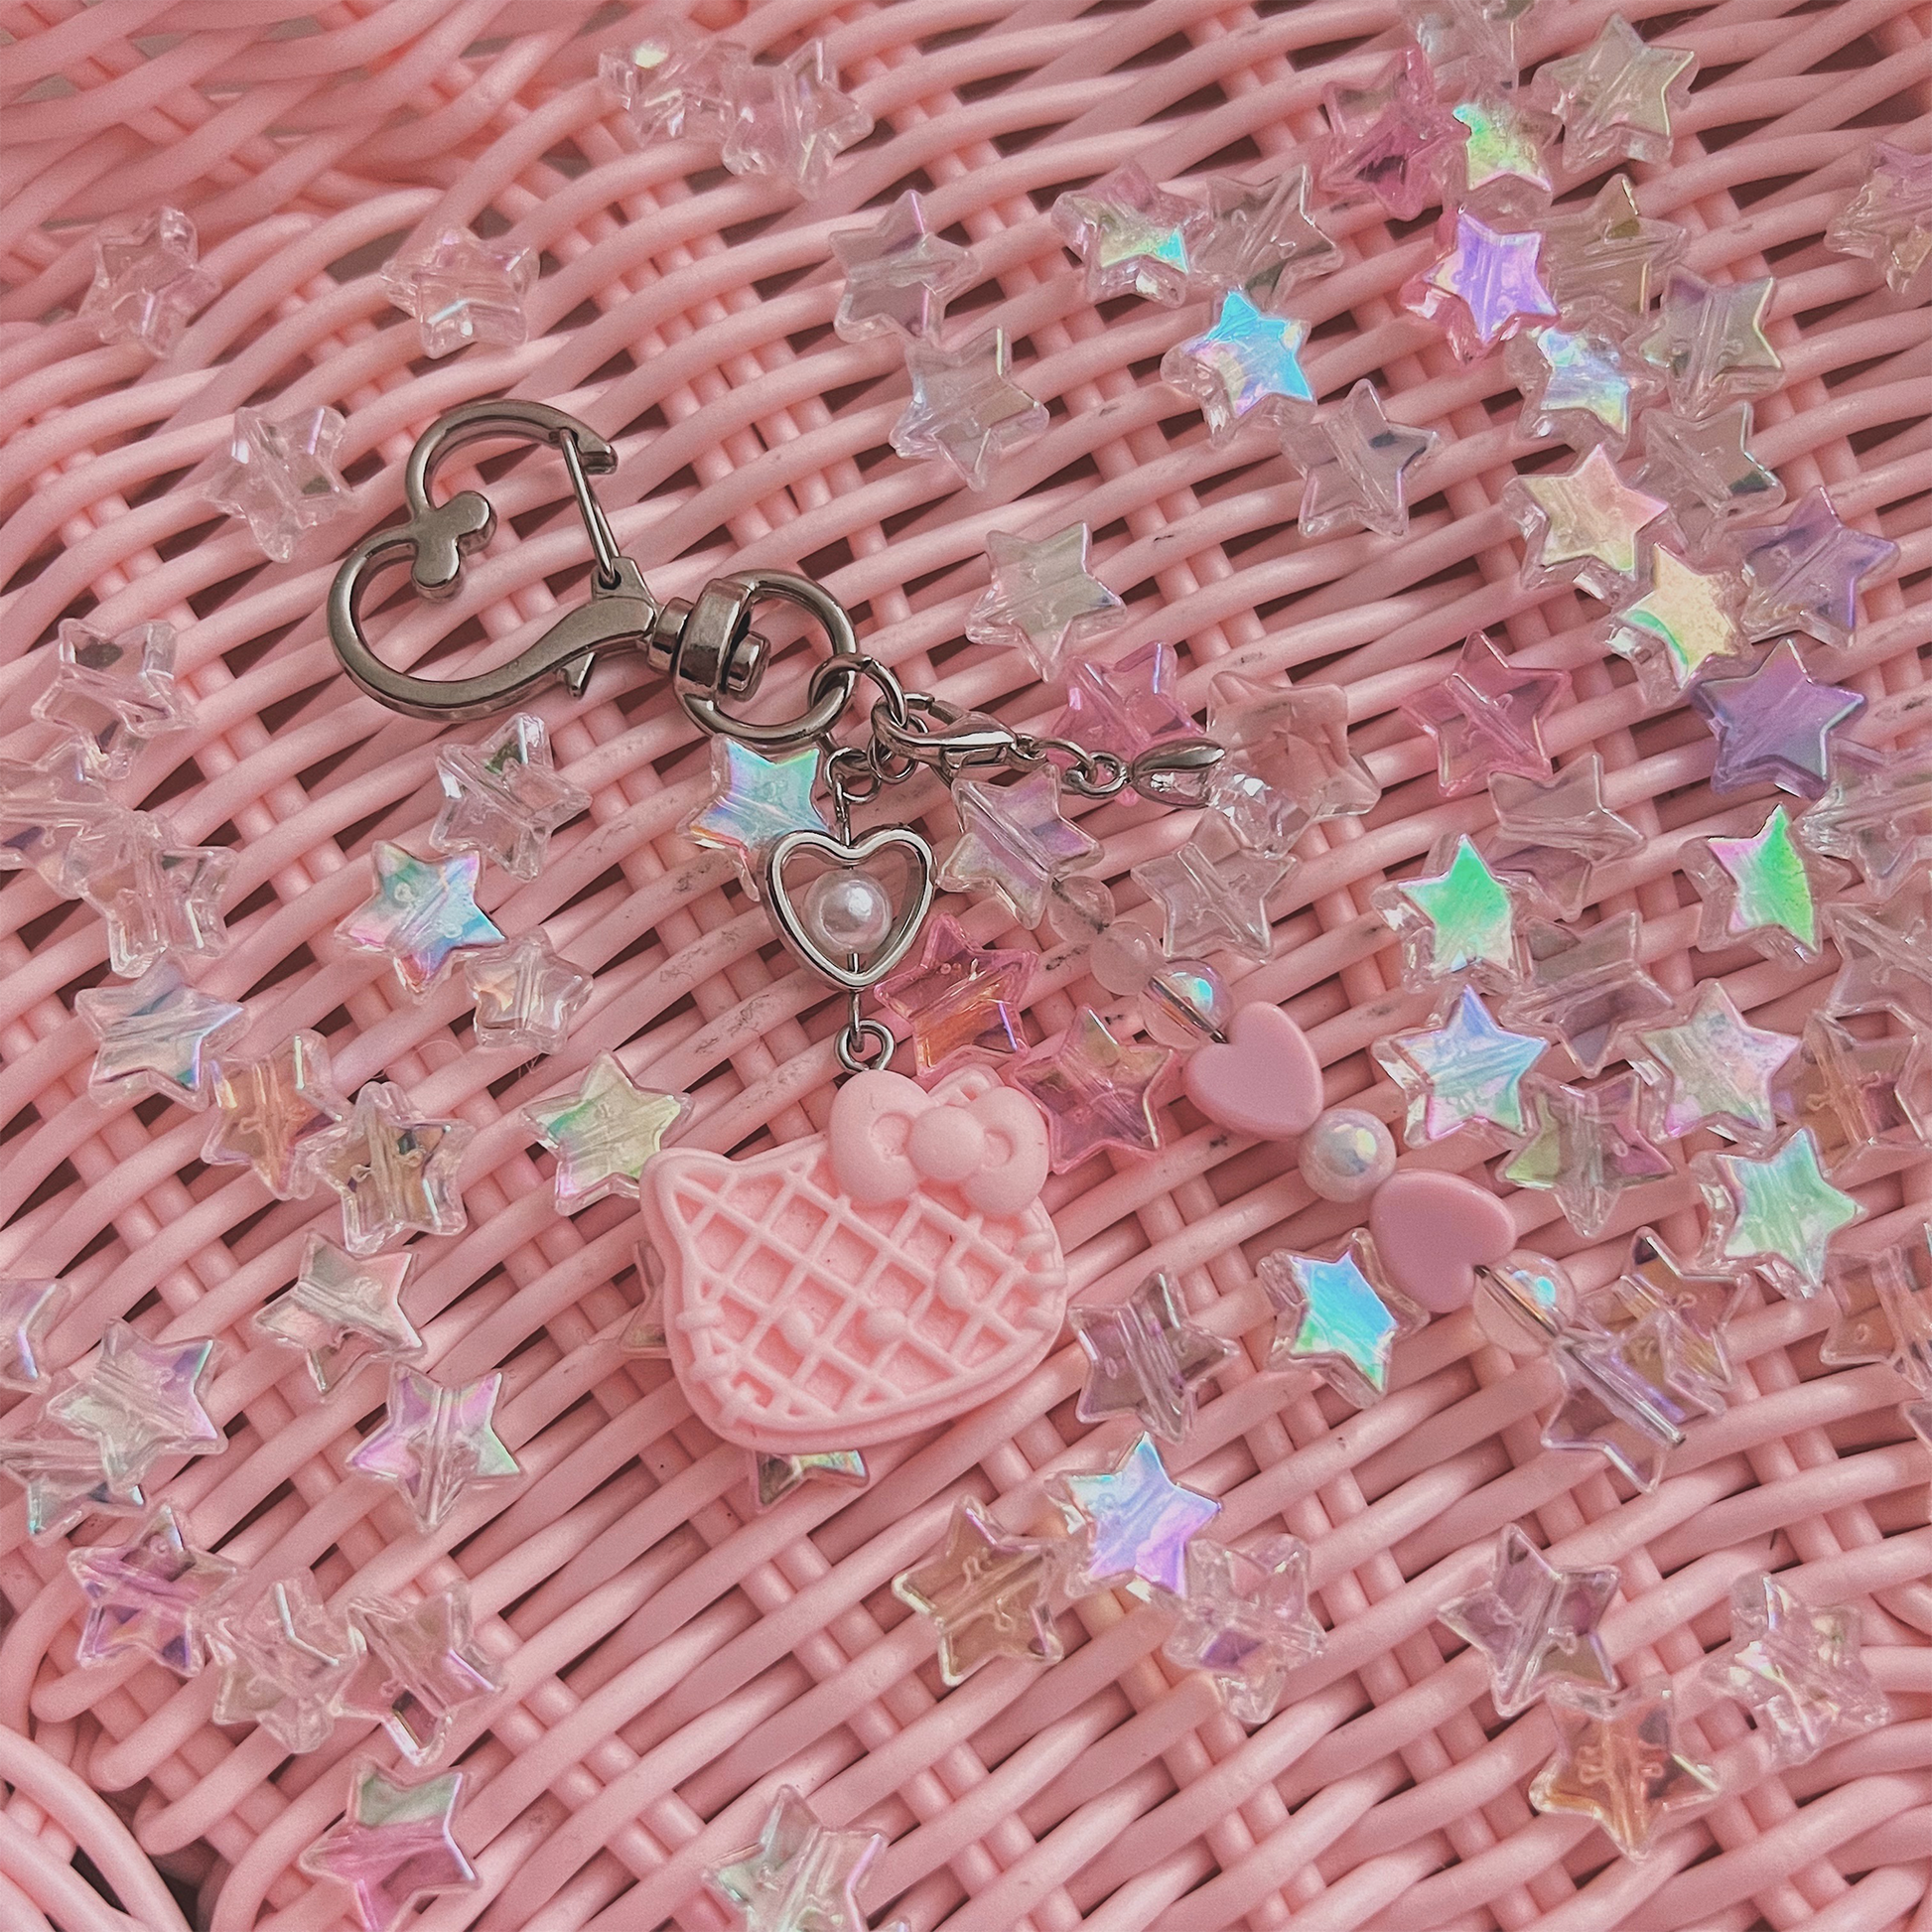 Pink Hello Kitty Waffle Charm specialty keychain with pink weaved basket background with holographic stars.